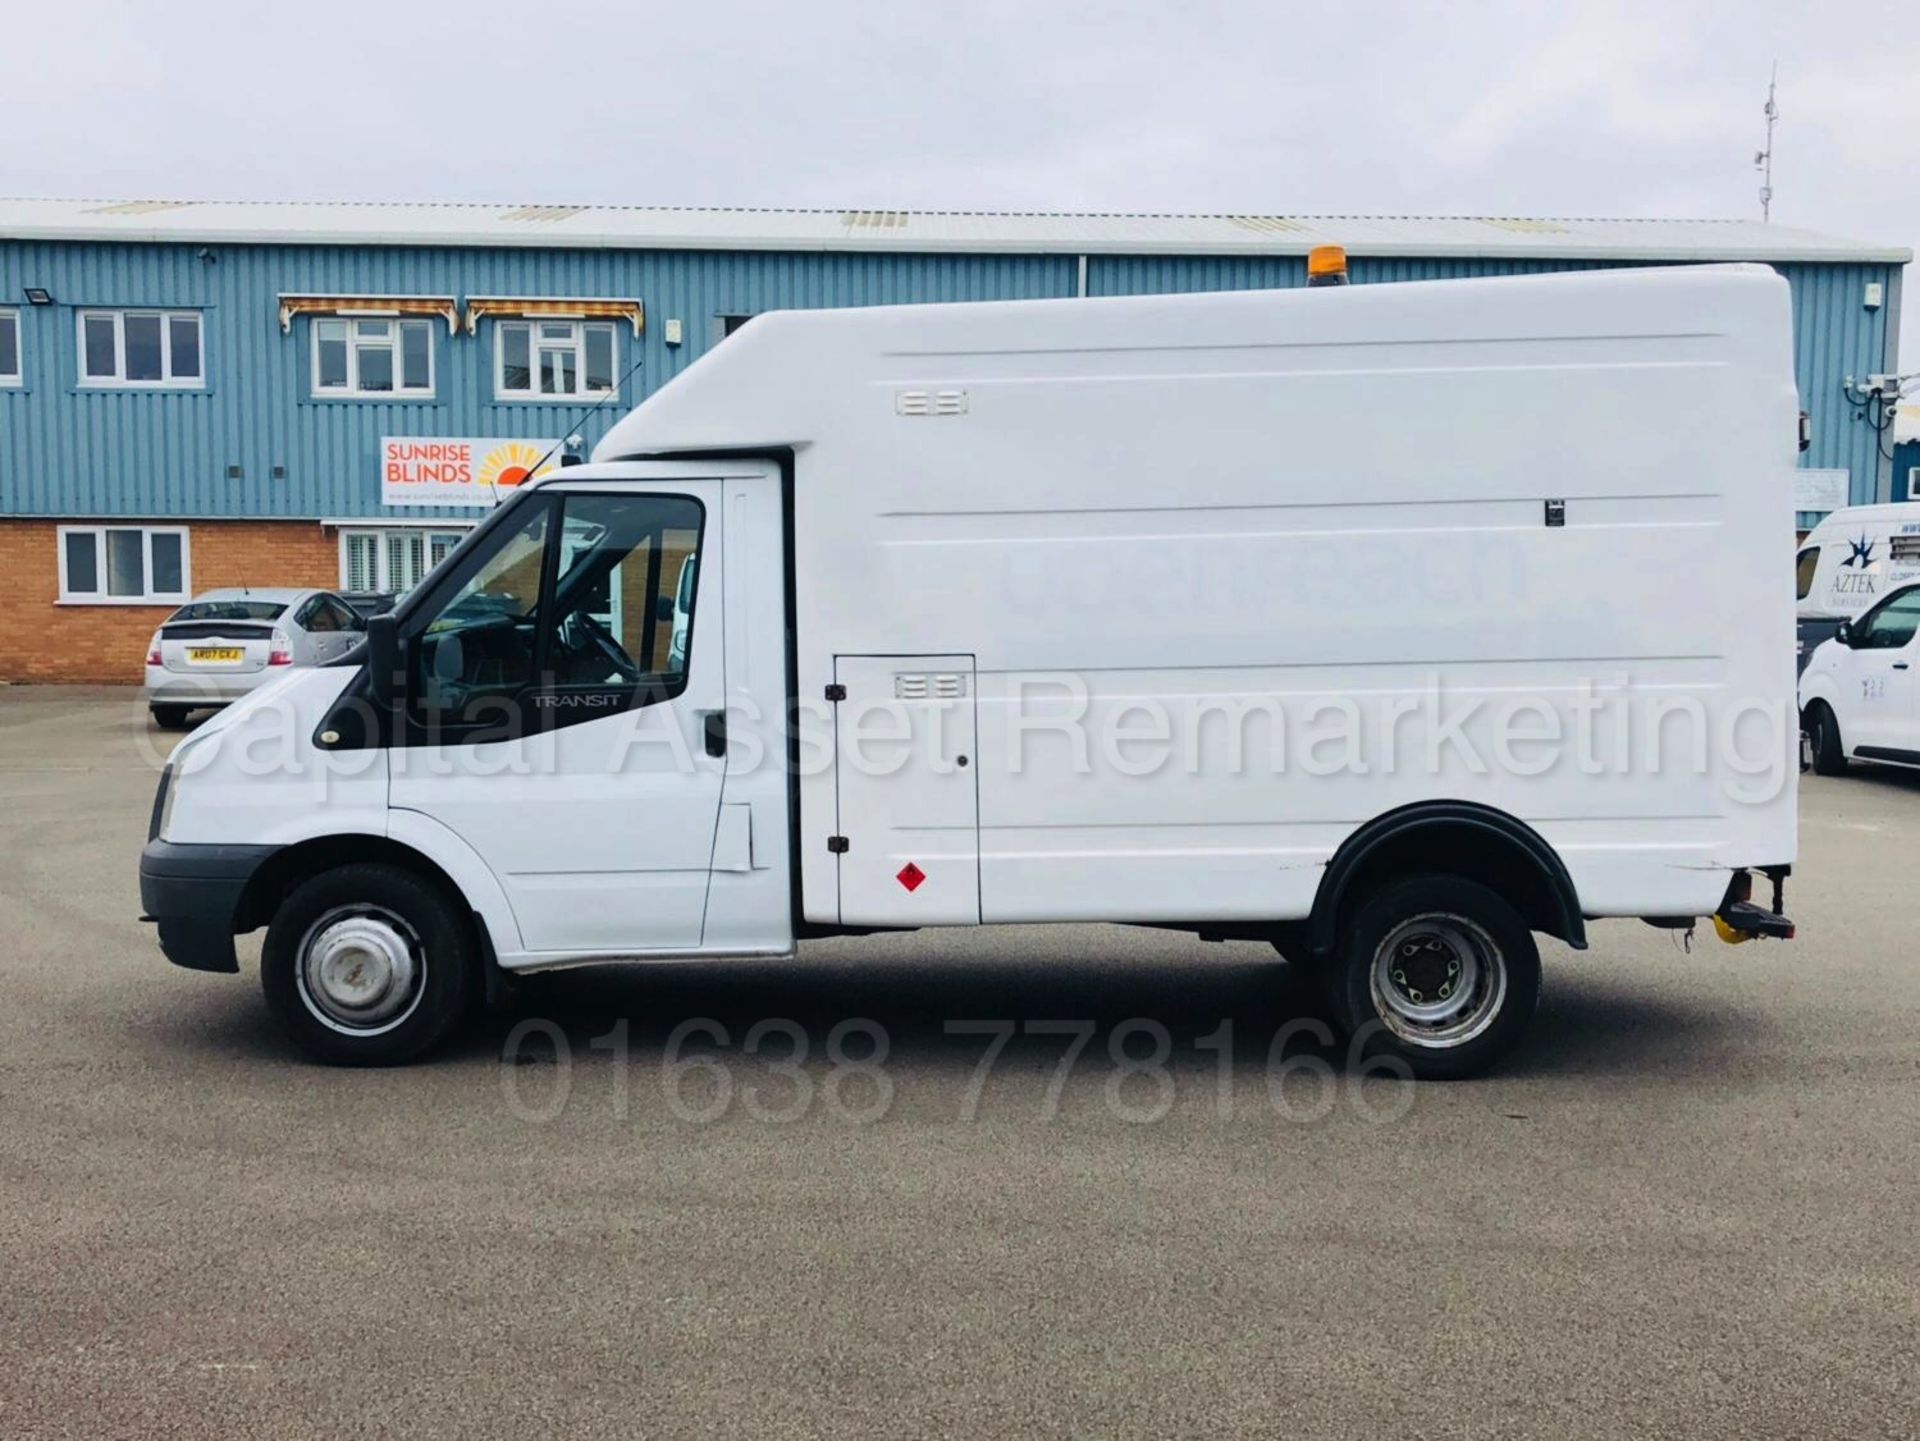 (On Sale) FORD TRANSIT 100 350 'BOX / LUTON VAN' (2010) '2.4 TDCI - 100 BHP' (1 COMPANY OWNER) - Image 11 of 29